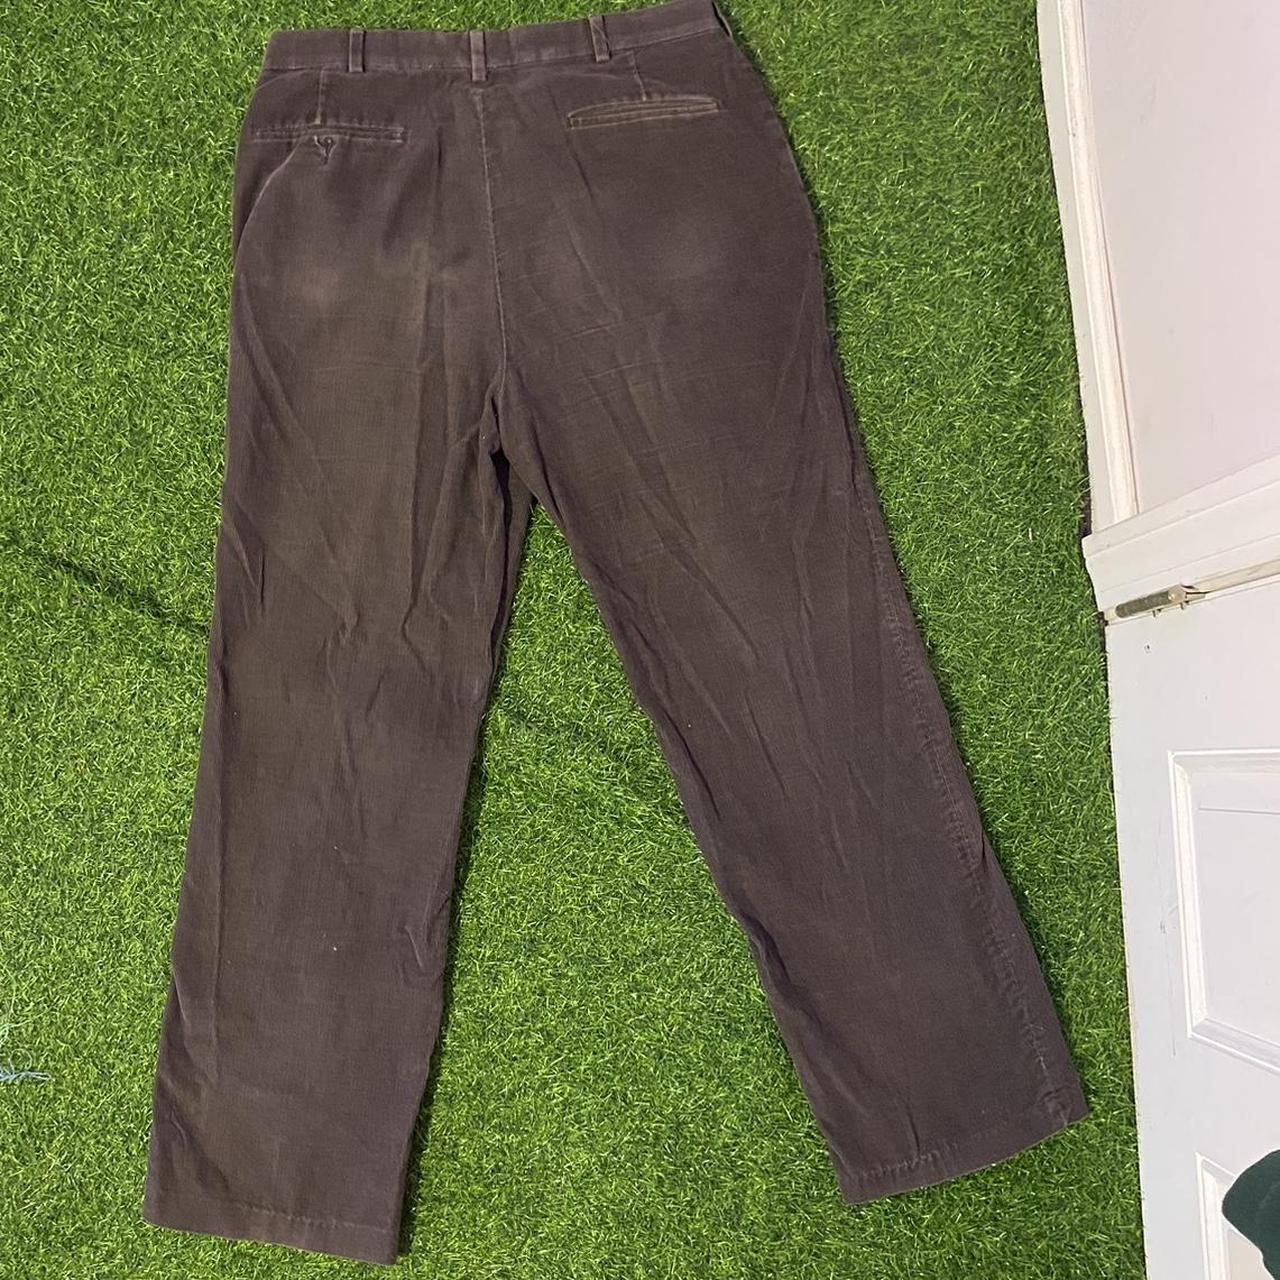 dark grey corduroy pants insanely old tags can’t... - Depop